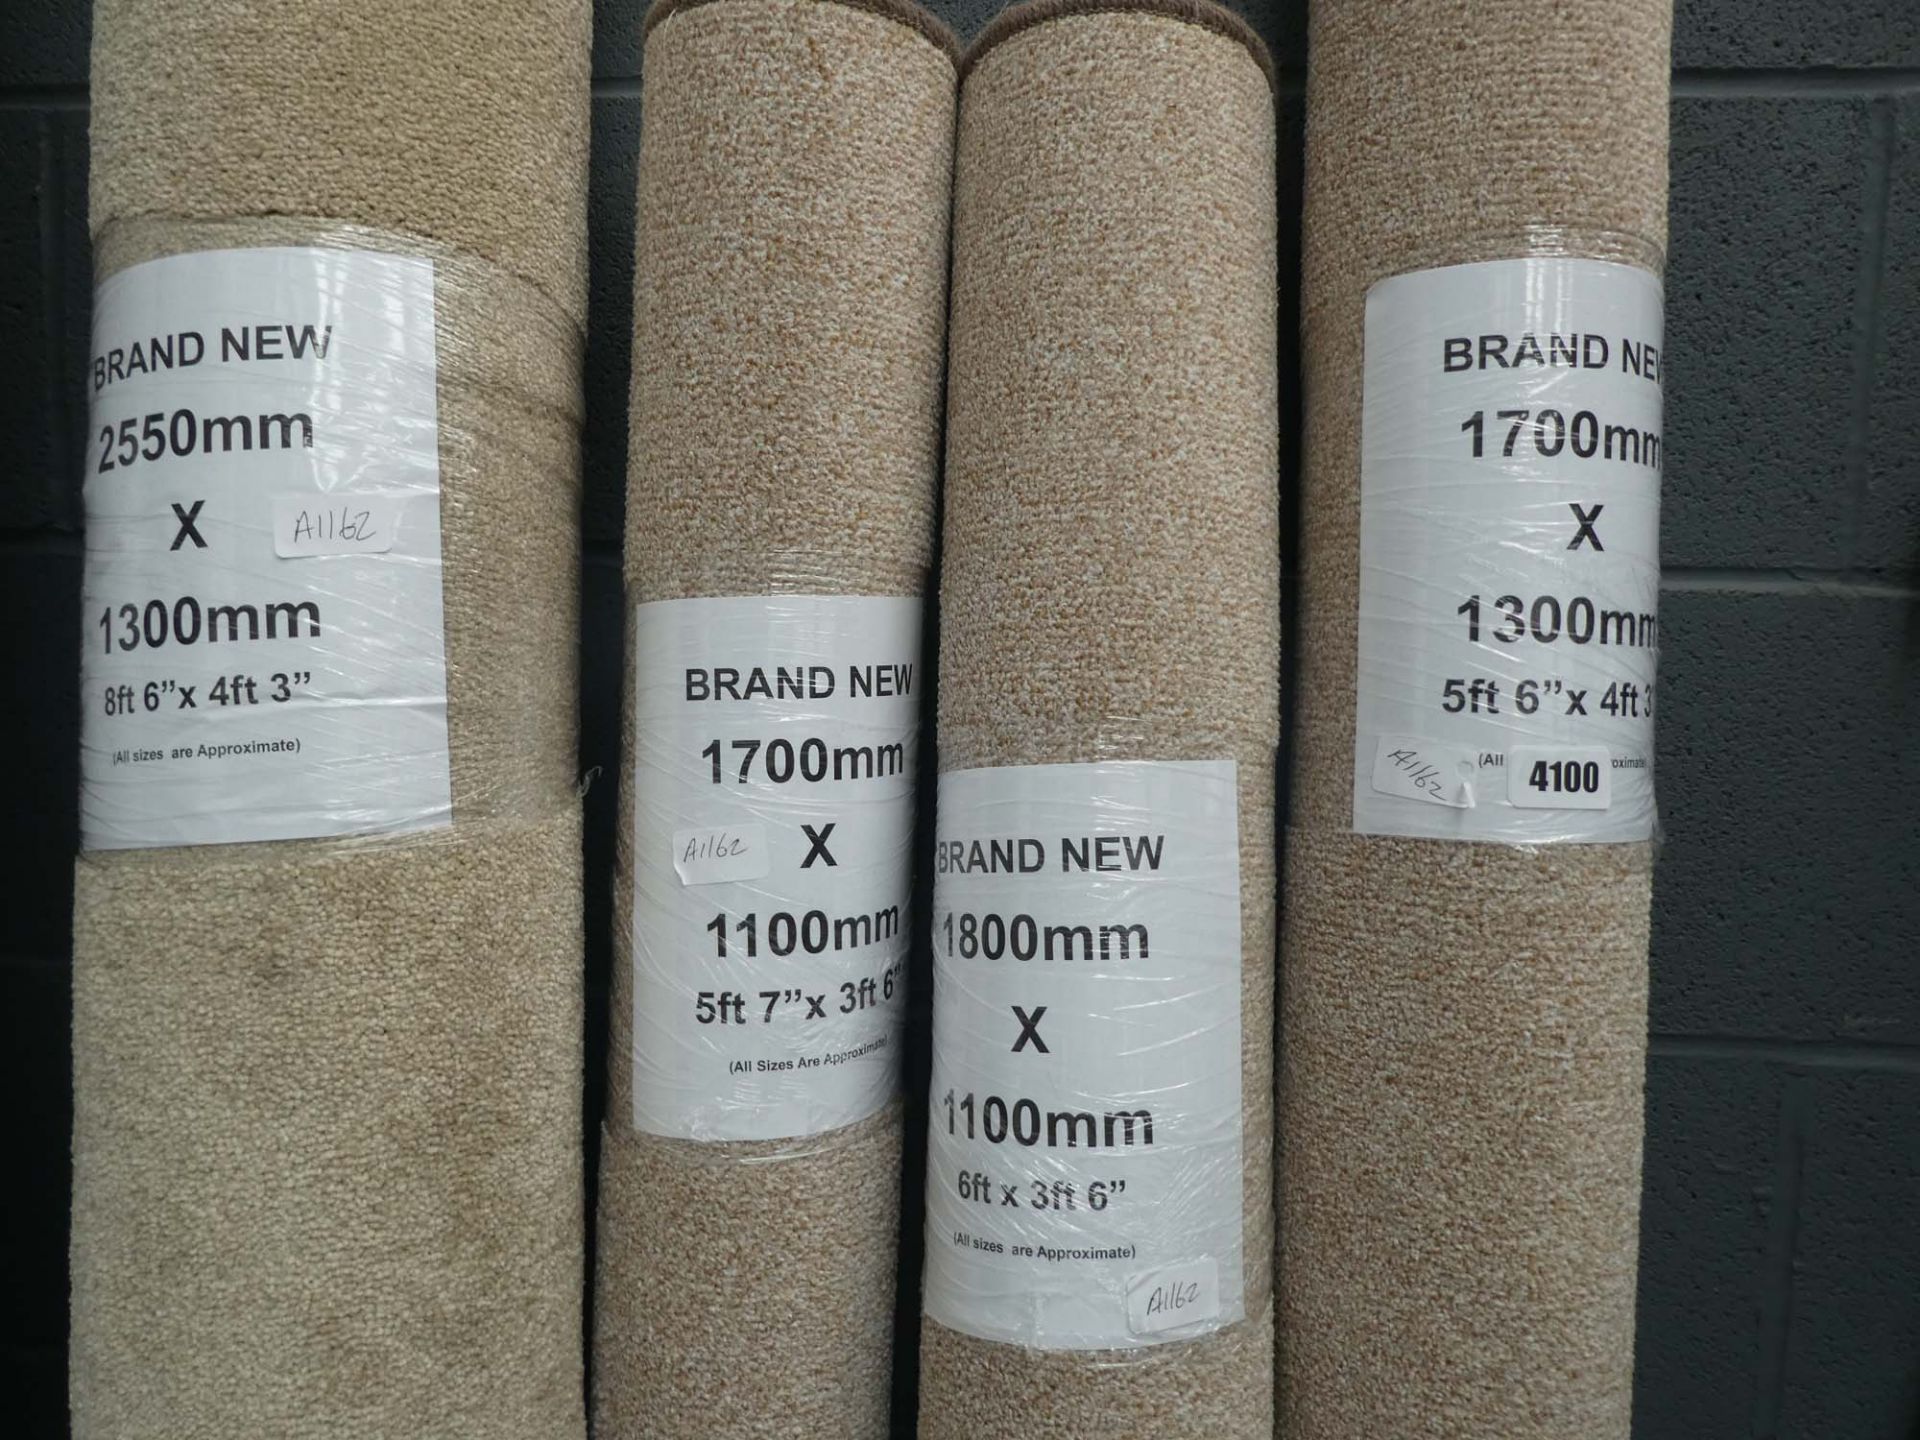 4101 4 beige rolls of carpet mats in various sizes - Image 2 of 2